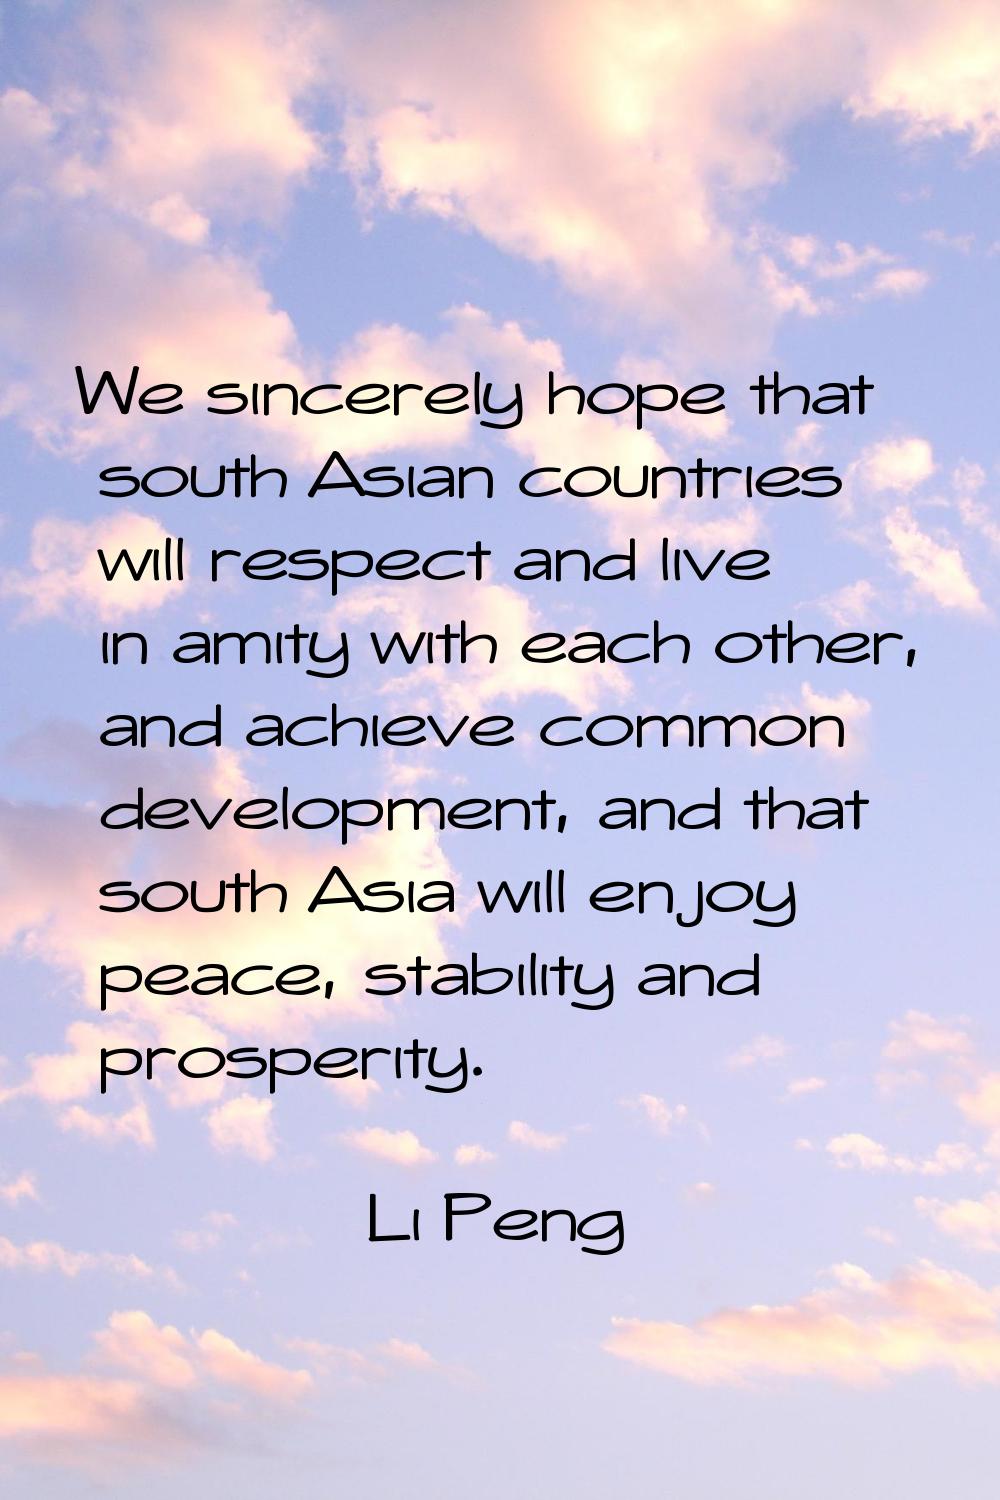 We sincerely hope that south Asian countries will respect and live in amity with each other, and ac